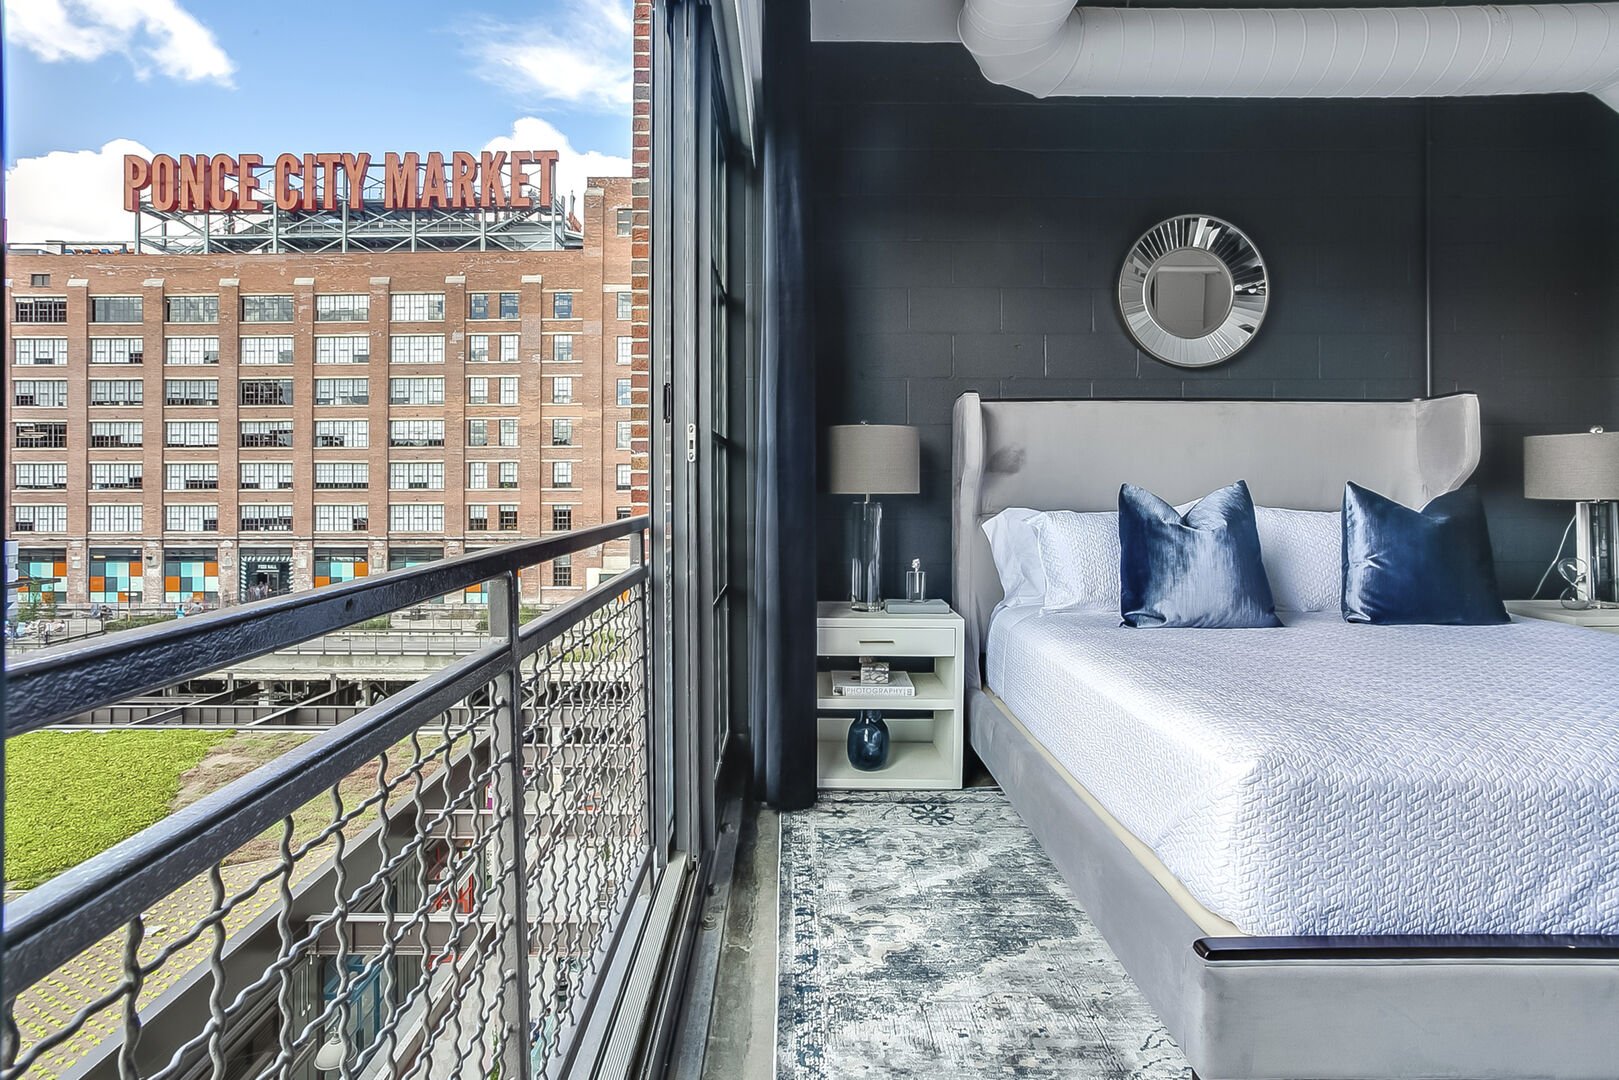 The large bed and nightstands of the Sleeping area of this Apartment Near Ponce City Market.